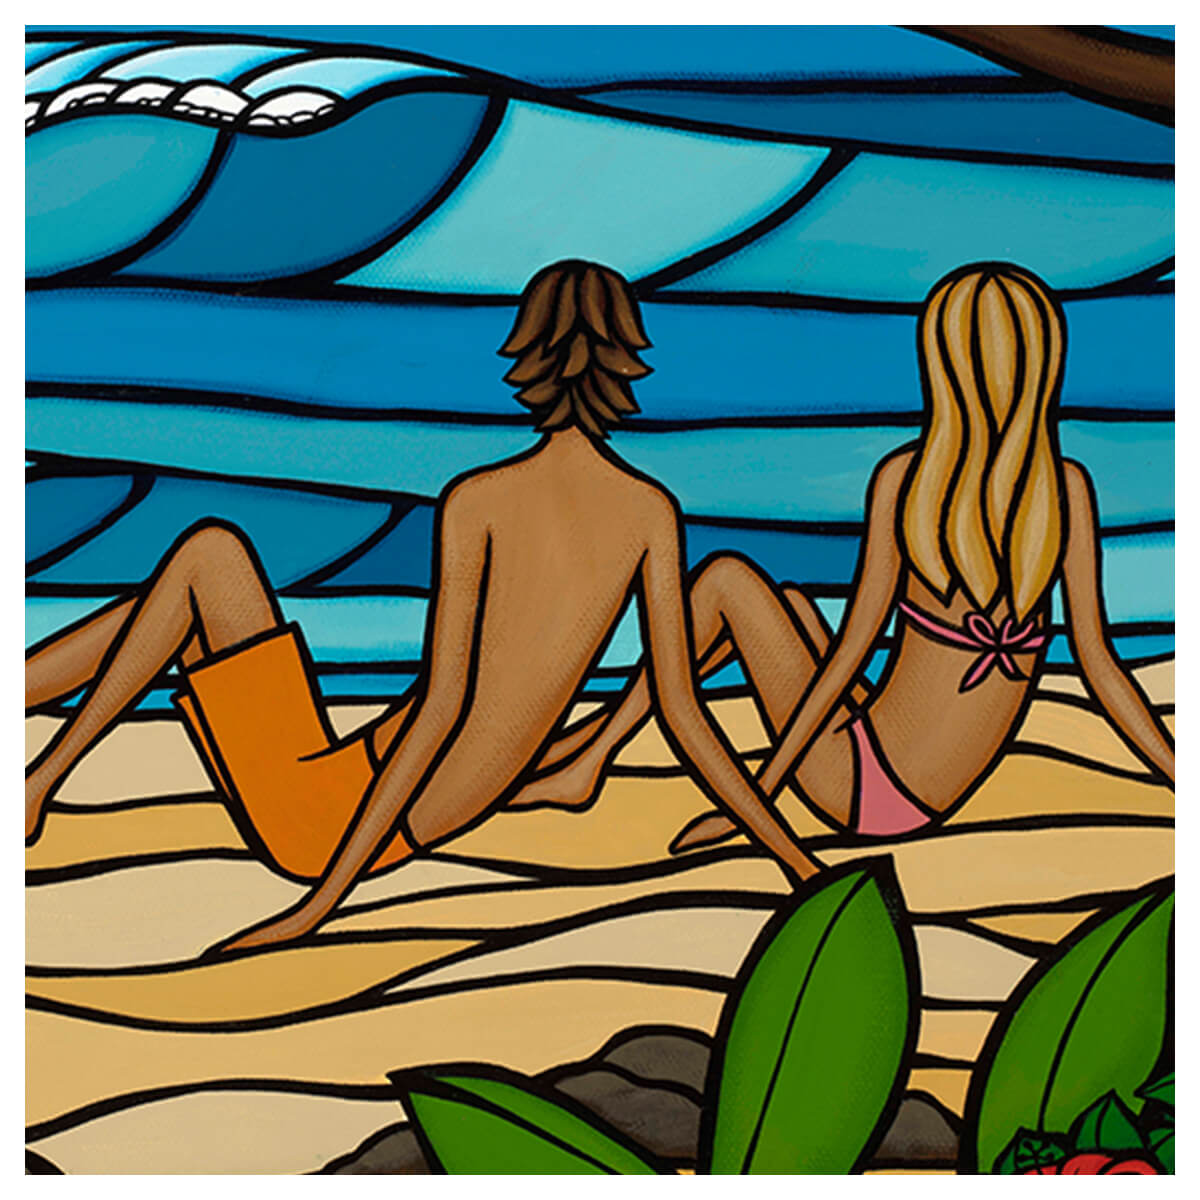 Romantic art by Hawaii artist Heather Brown featuring a pair of surfers relaxing on a secluded tropical beach - couple detail